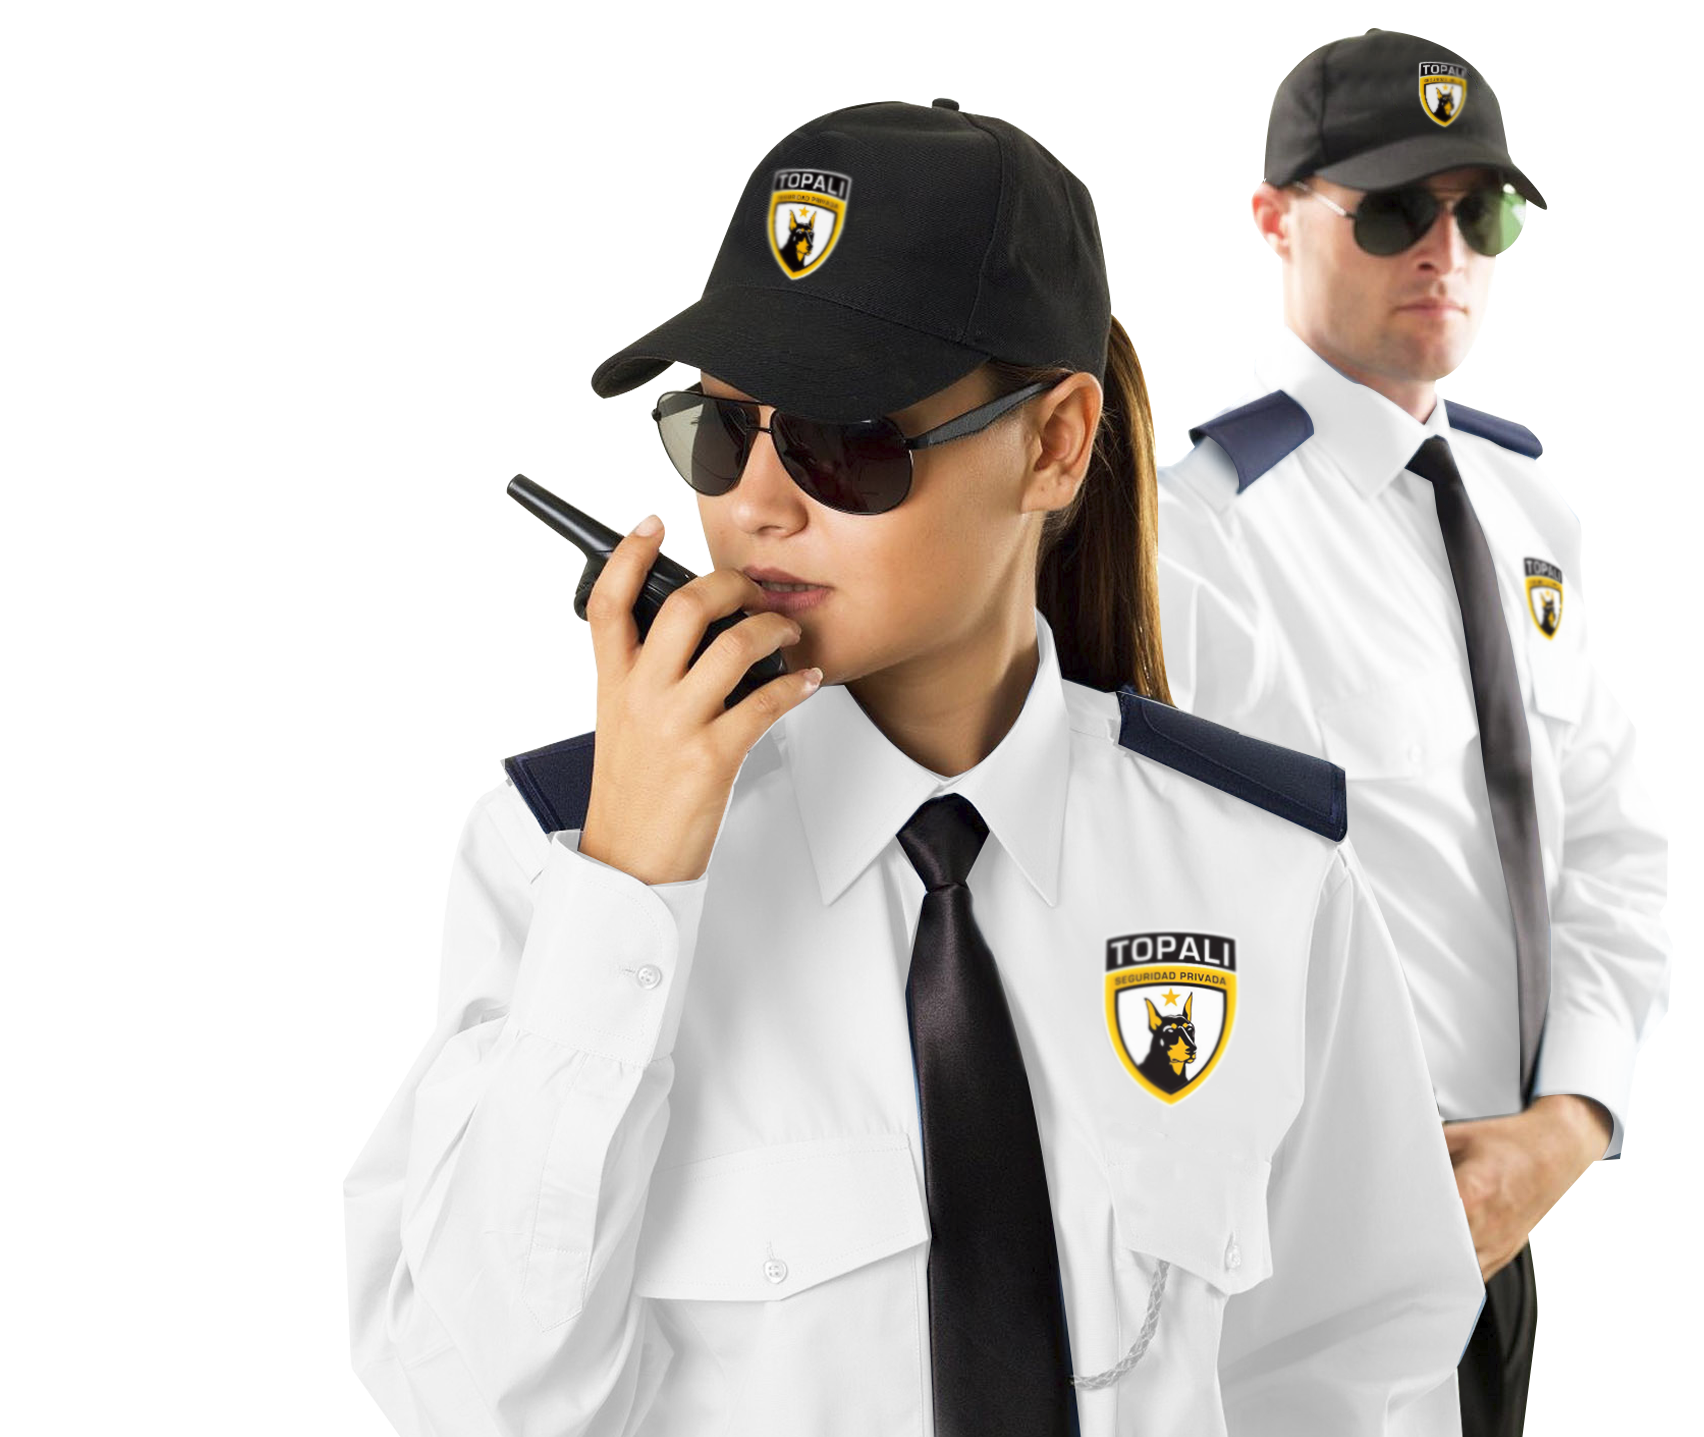 Police Pimpri-Chinchwad Company Guard Officer Security Clipart